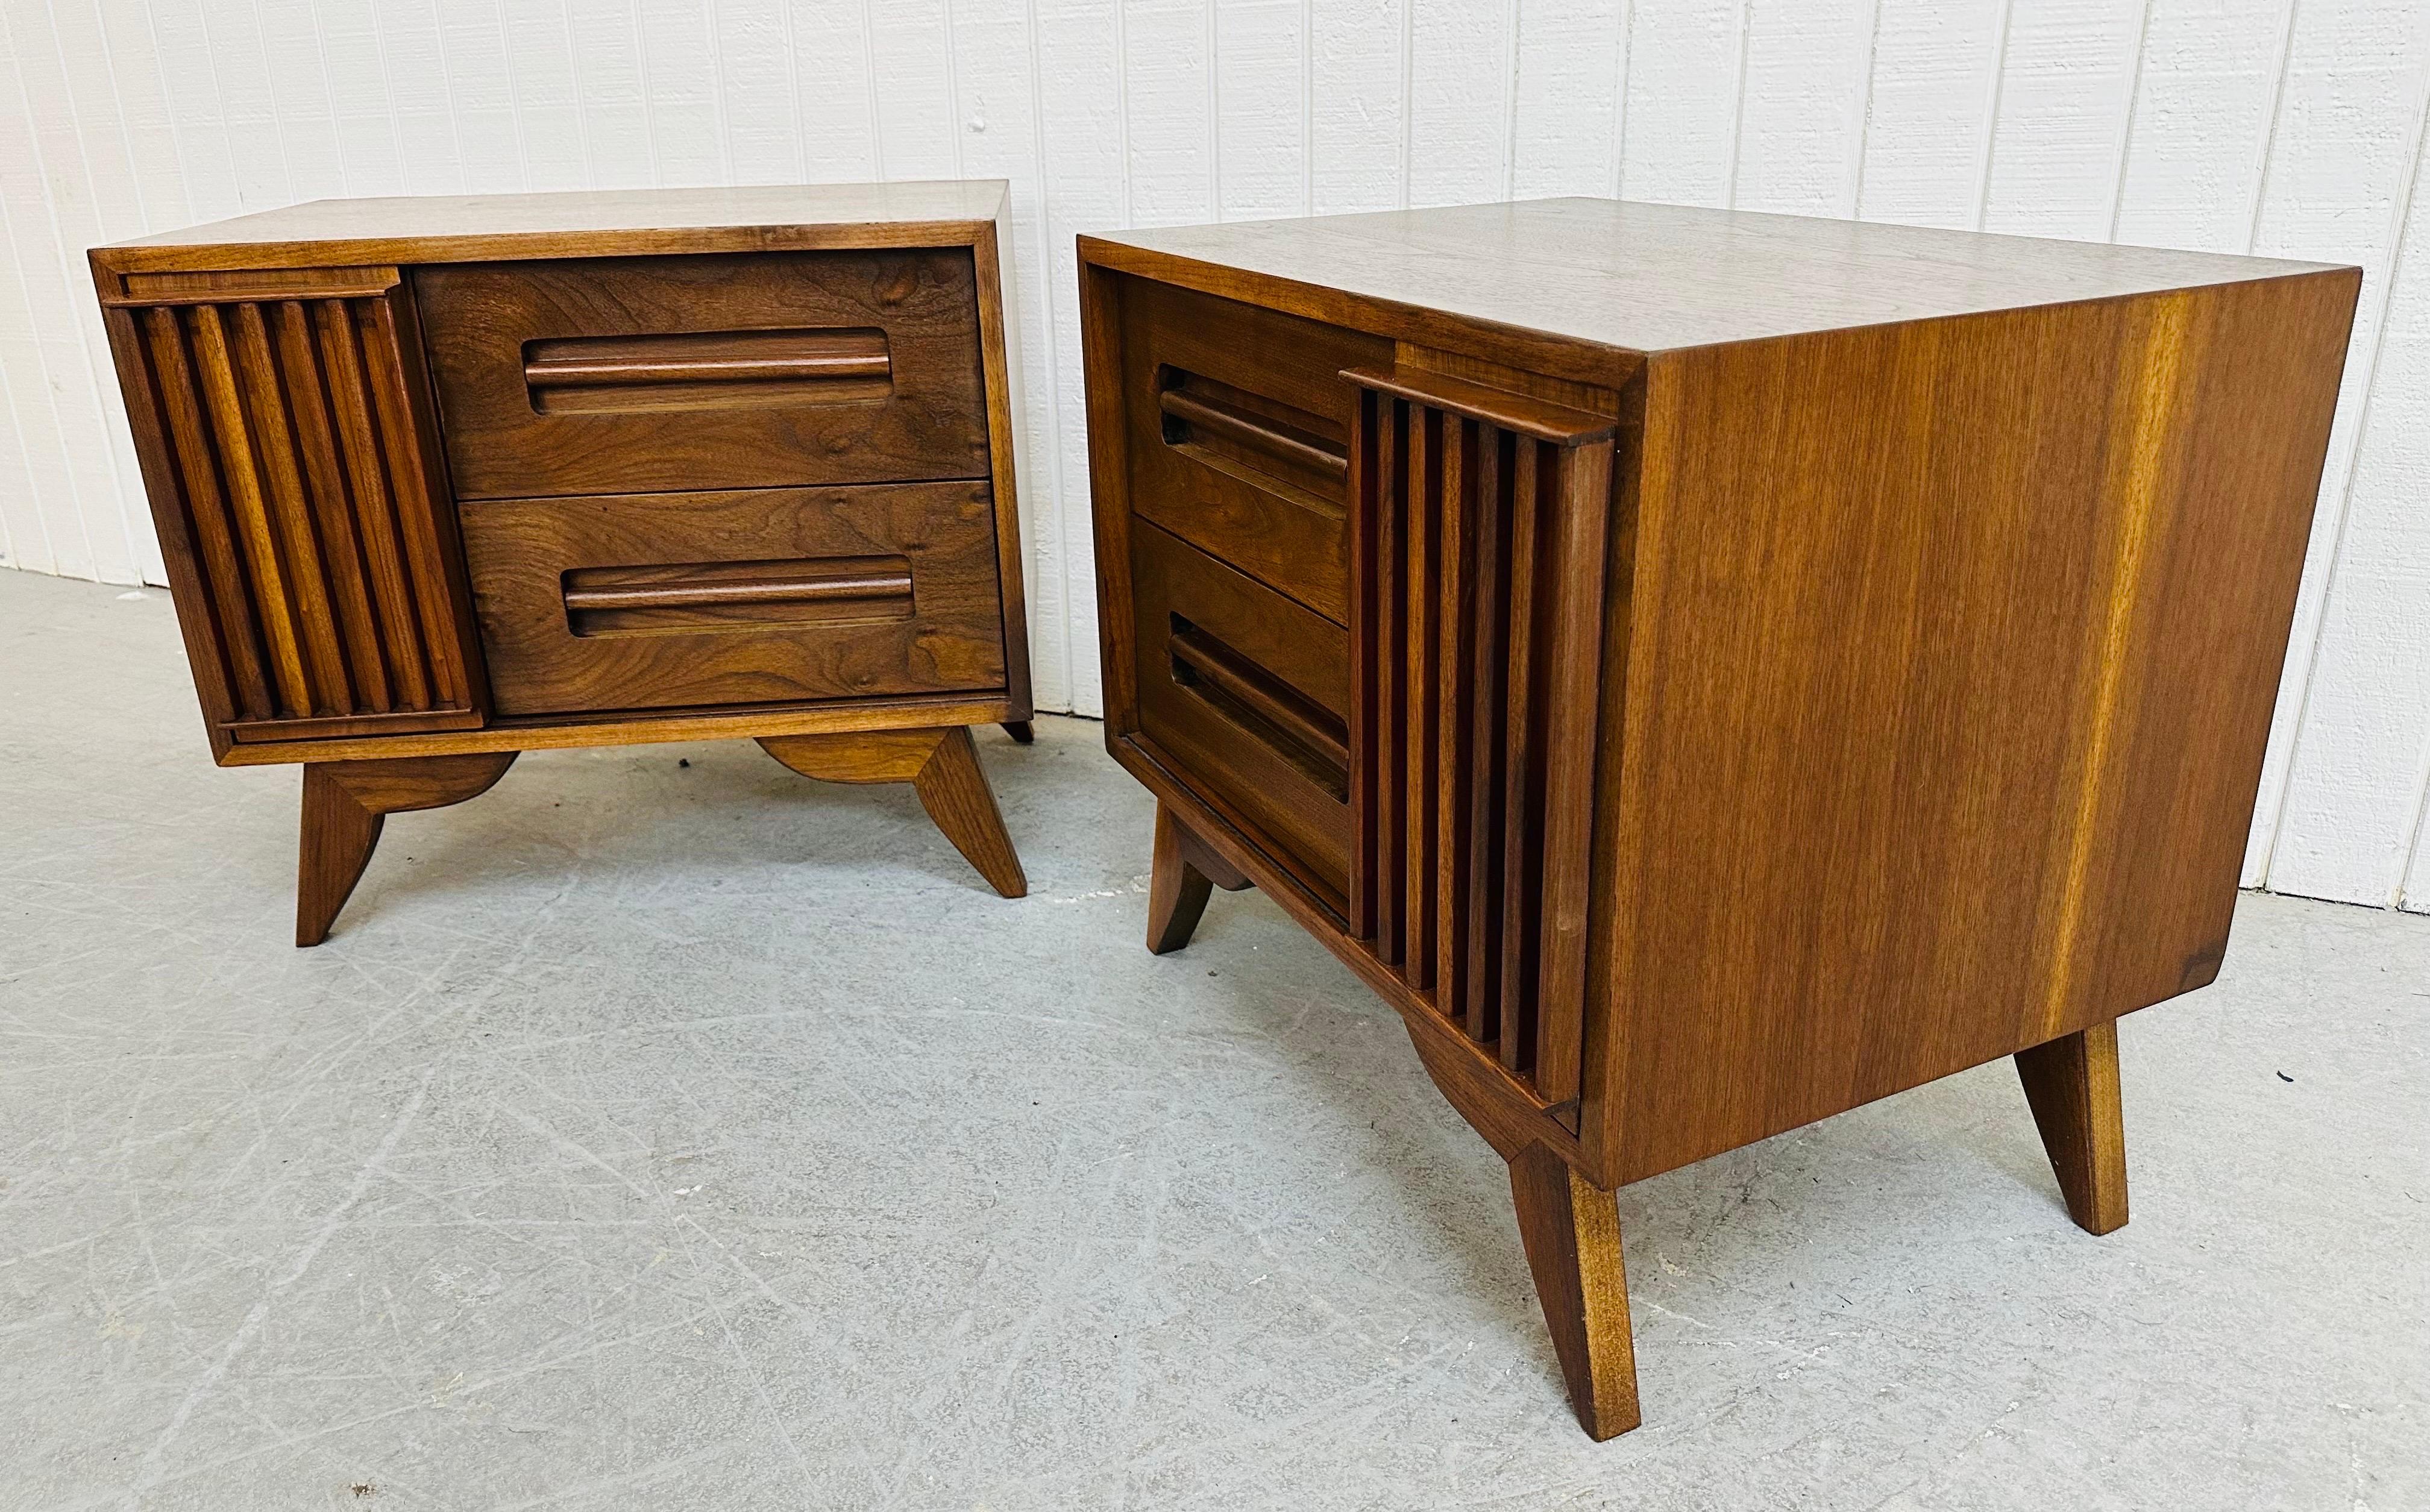 This listing is for a pair of Mid-Century Modern Sliding Door Walnut Nightstands. Featuring a straight line design, sliding door that reveals storage space, two drawers, flared modern legs, and a beautiful walnut finish. This is an exceptional